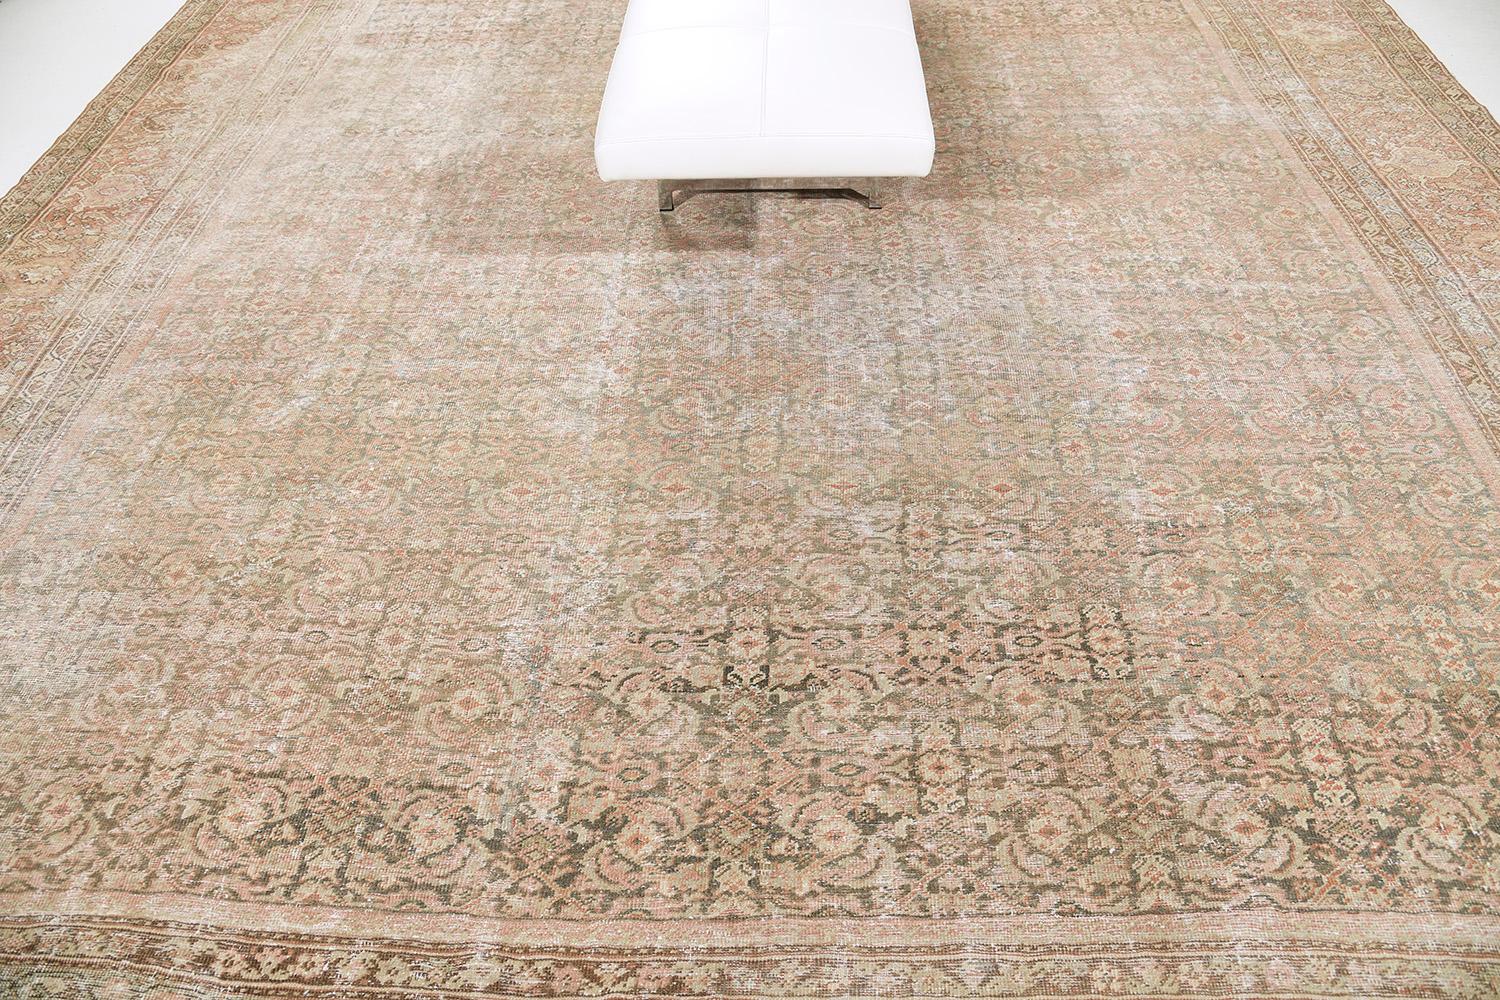 A captivating Antique Persian Mahal rug that charms you to an all-over pattern of botanical elements that is spread gracefully throughout the rust field. This fascinating rug is covered by majestic patterns of stylized patterns and alluring